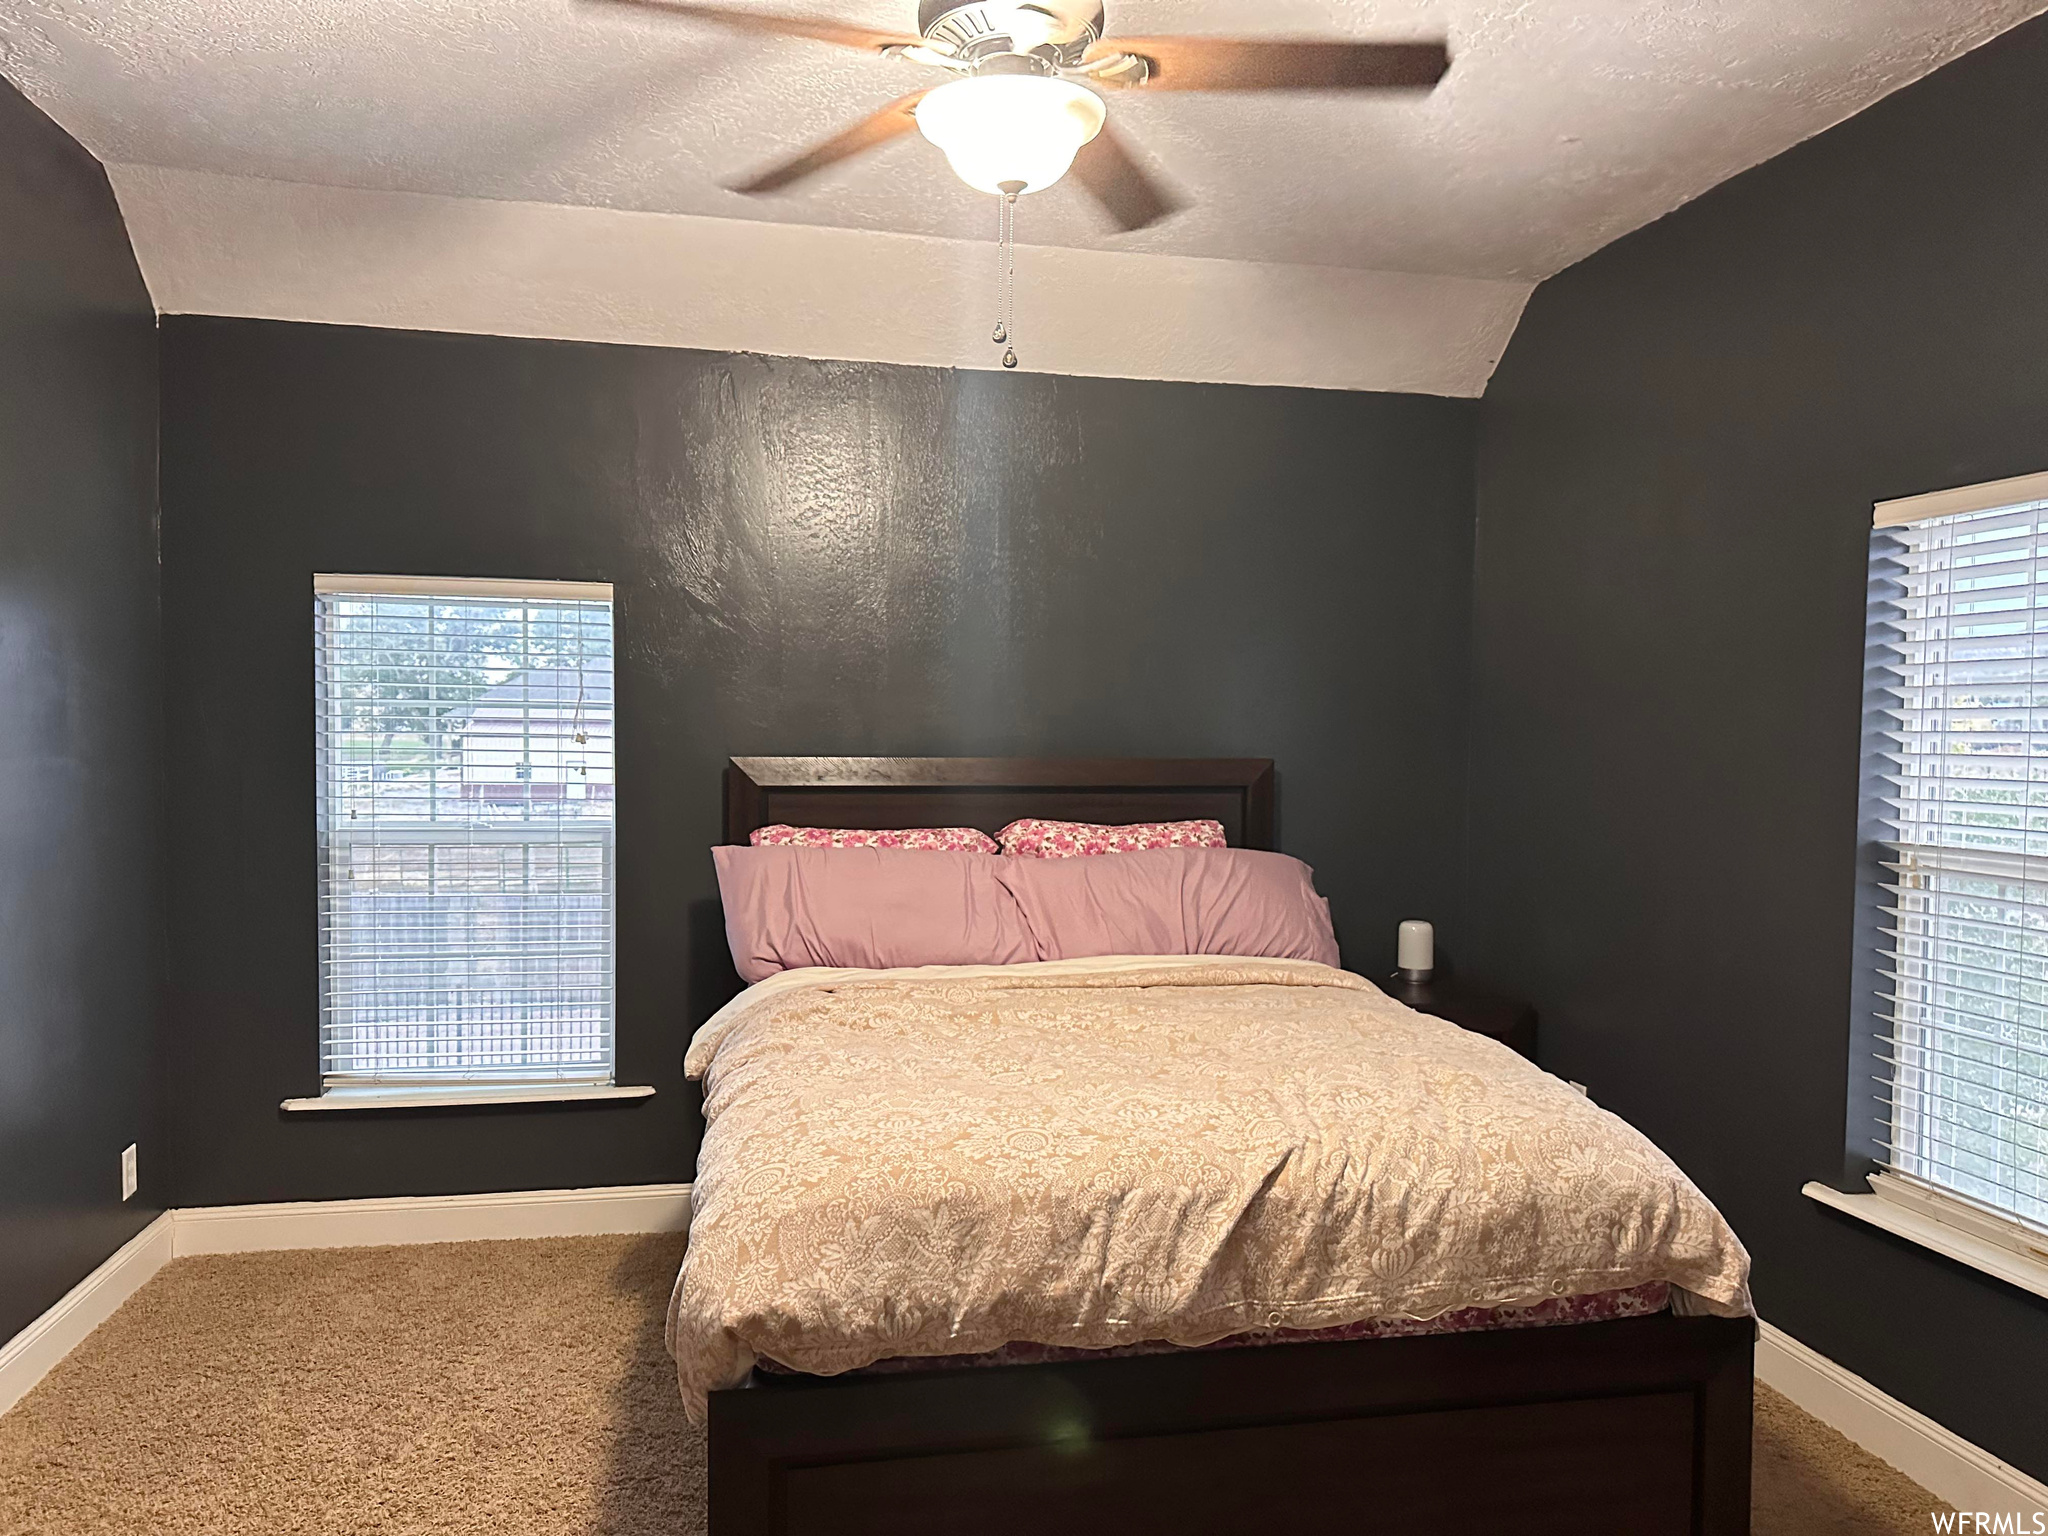 Bedroom with vaulted ceiling, ceiling fan, dark colored carpet, and a textured ceiling